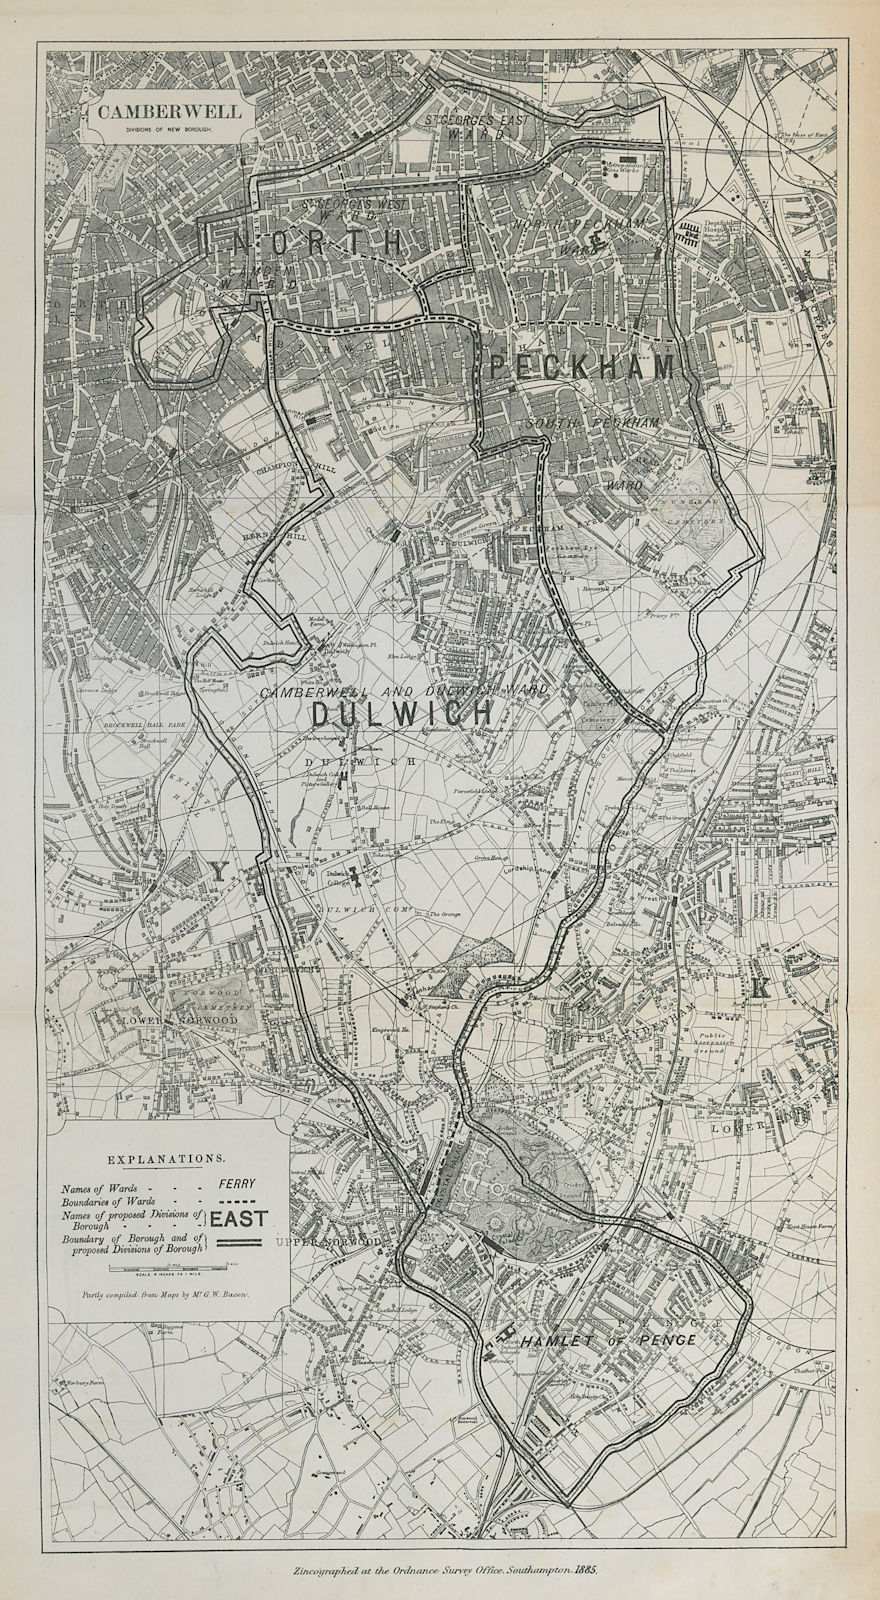 Associate Product Camberwell Parliamentary Borough. Dulwich Penge. BOUNDARY COMMISSION 1885 map